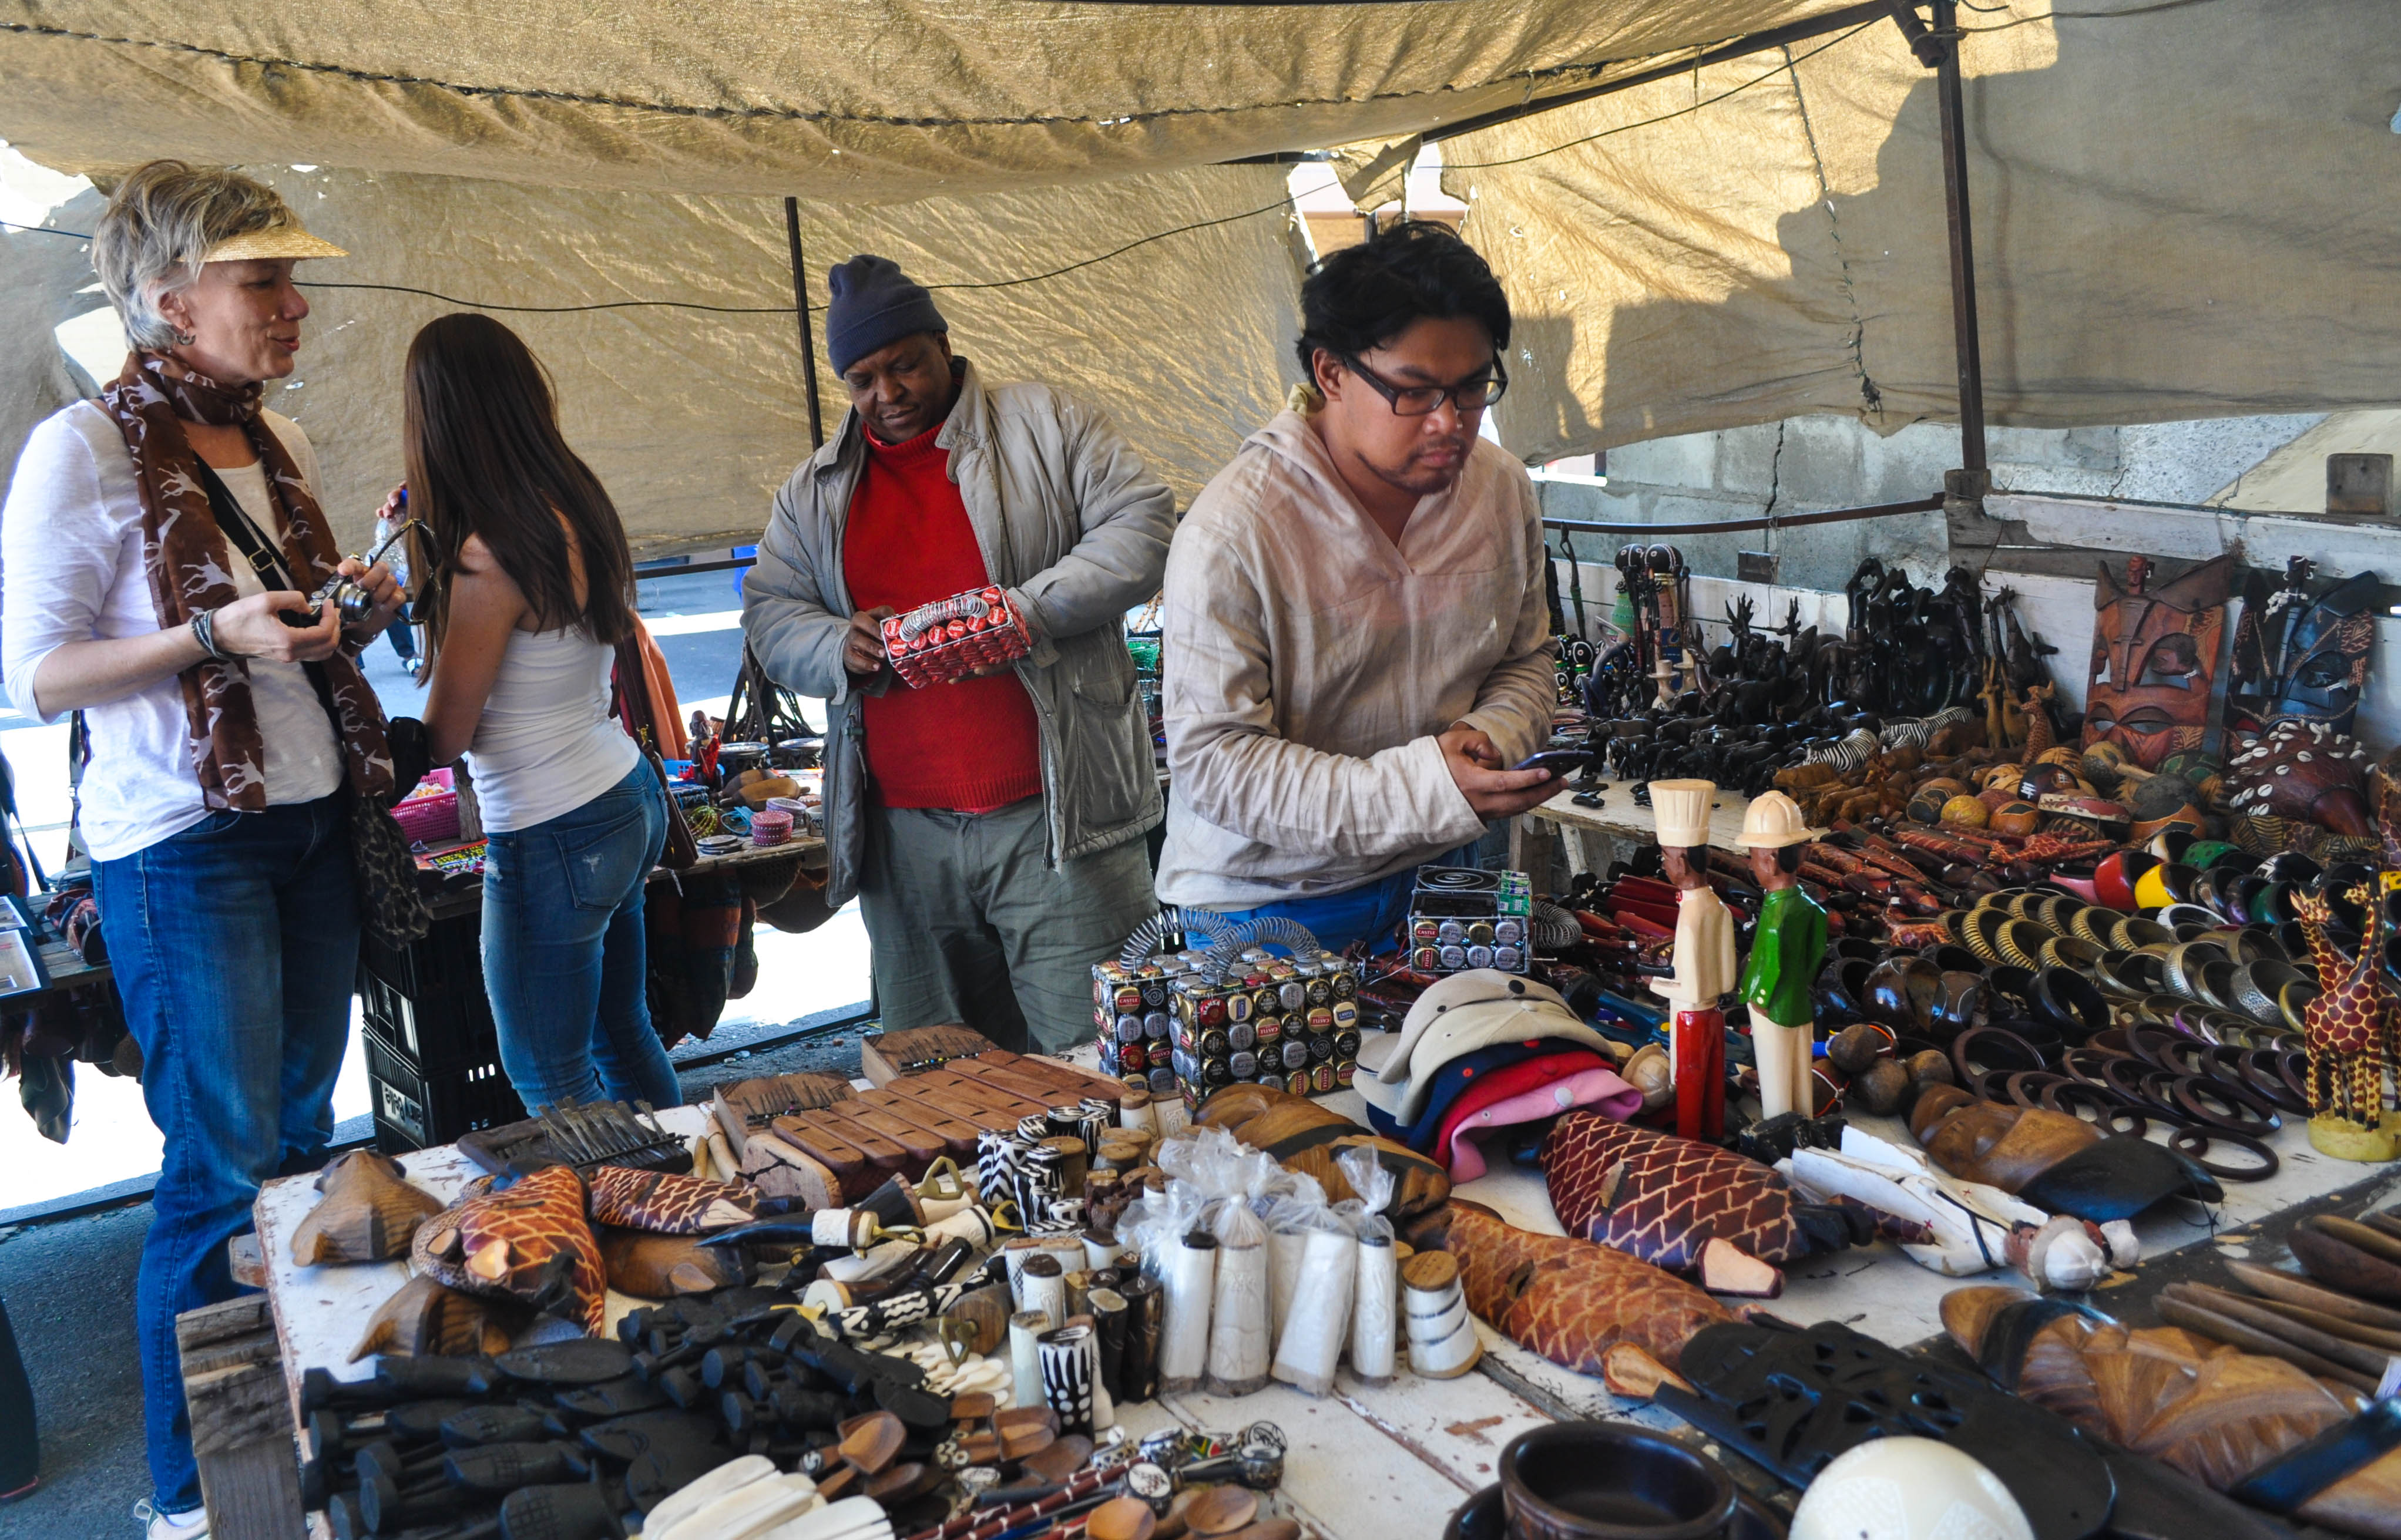 Shopping for handmade crafts in Langa Township outside of Cape Town